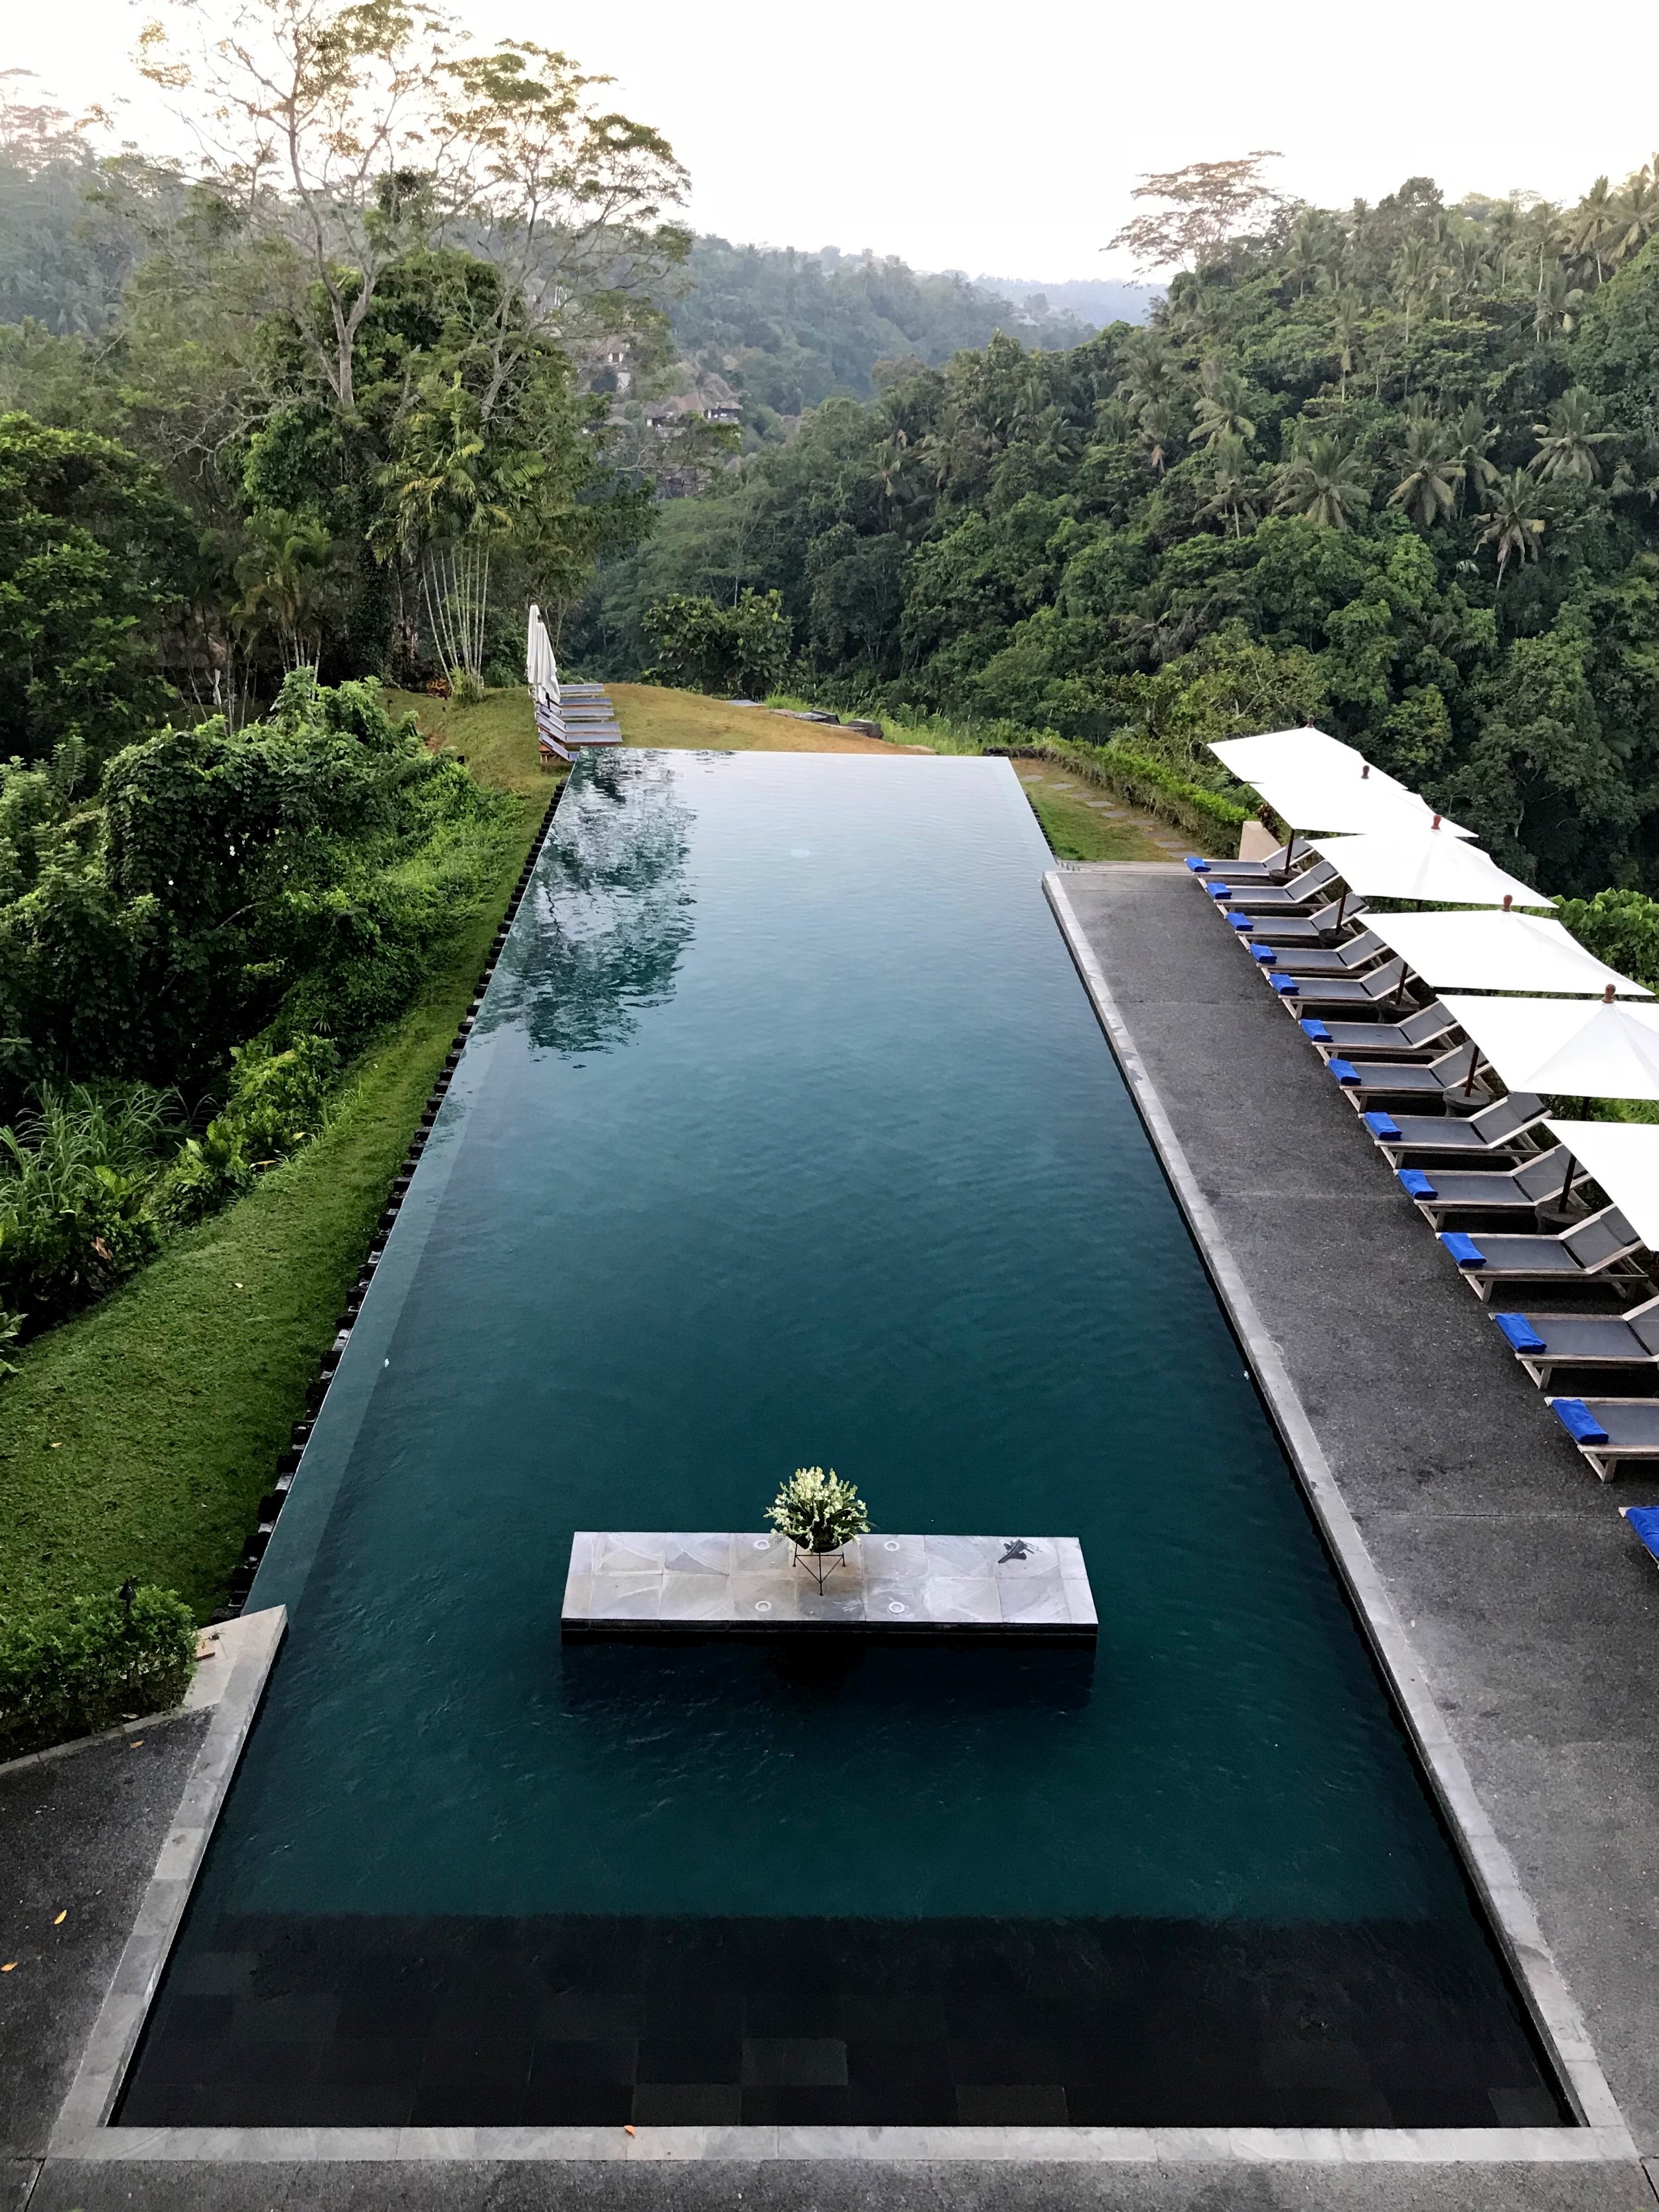 Alila Ubud: A Luxury Resort Nestled in a Jungle Valley